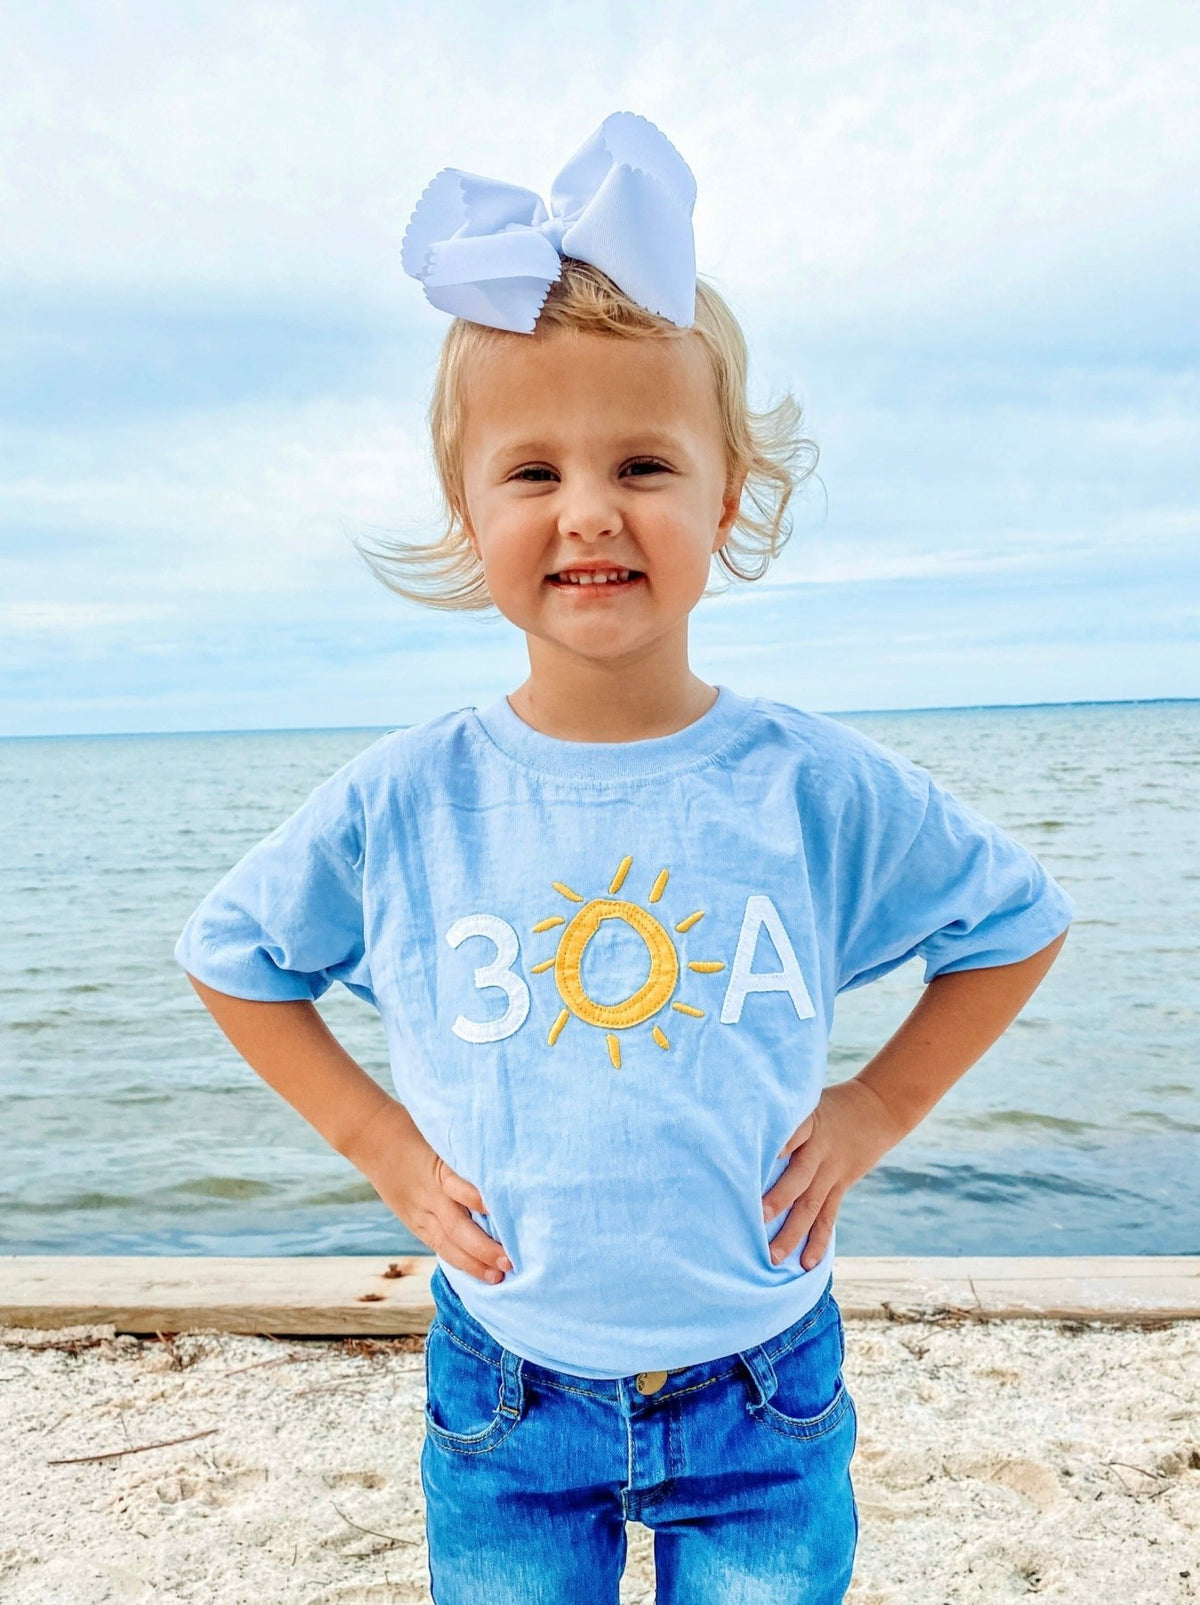 30A Block Logo Applique Youth T - Shirt - 30A Gear - youth tee